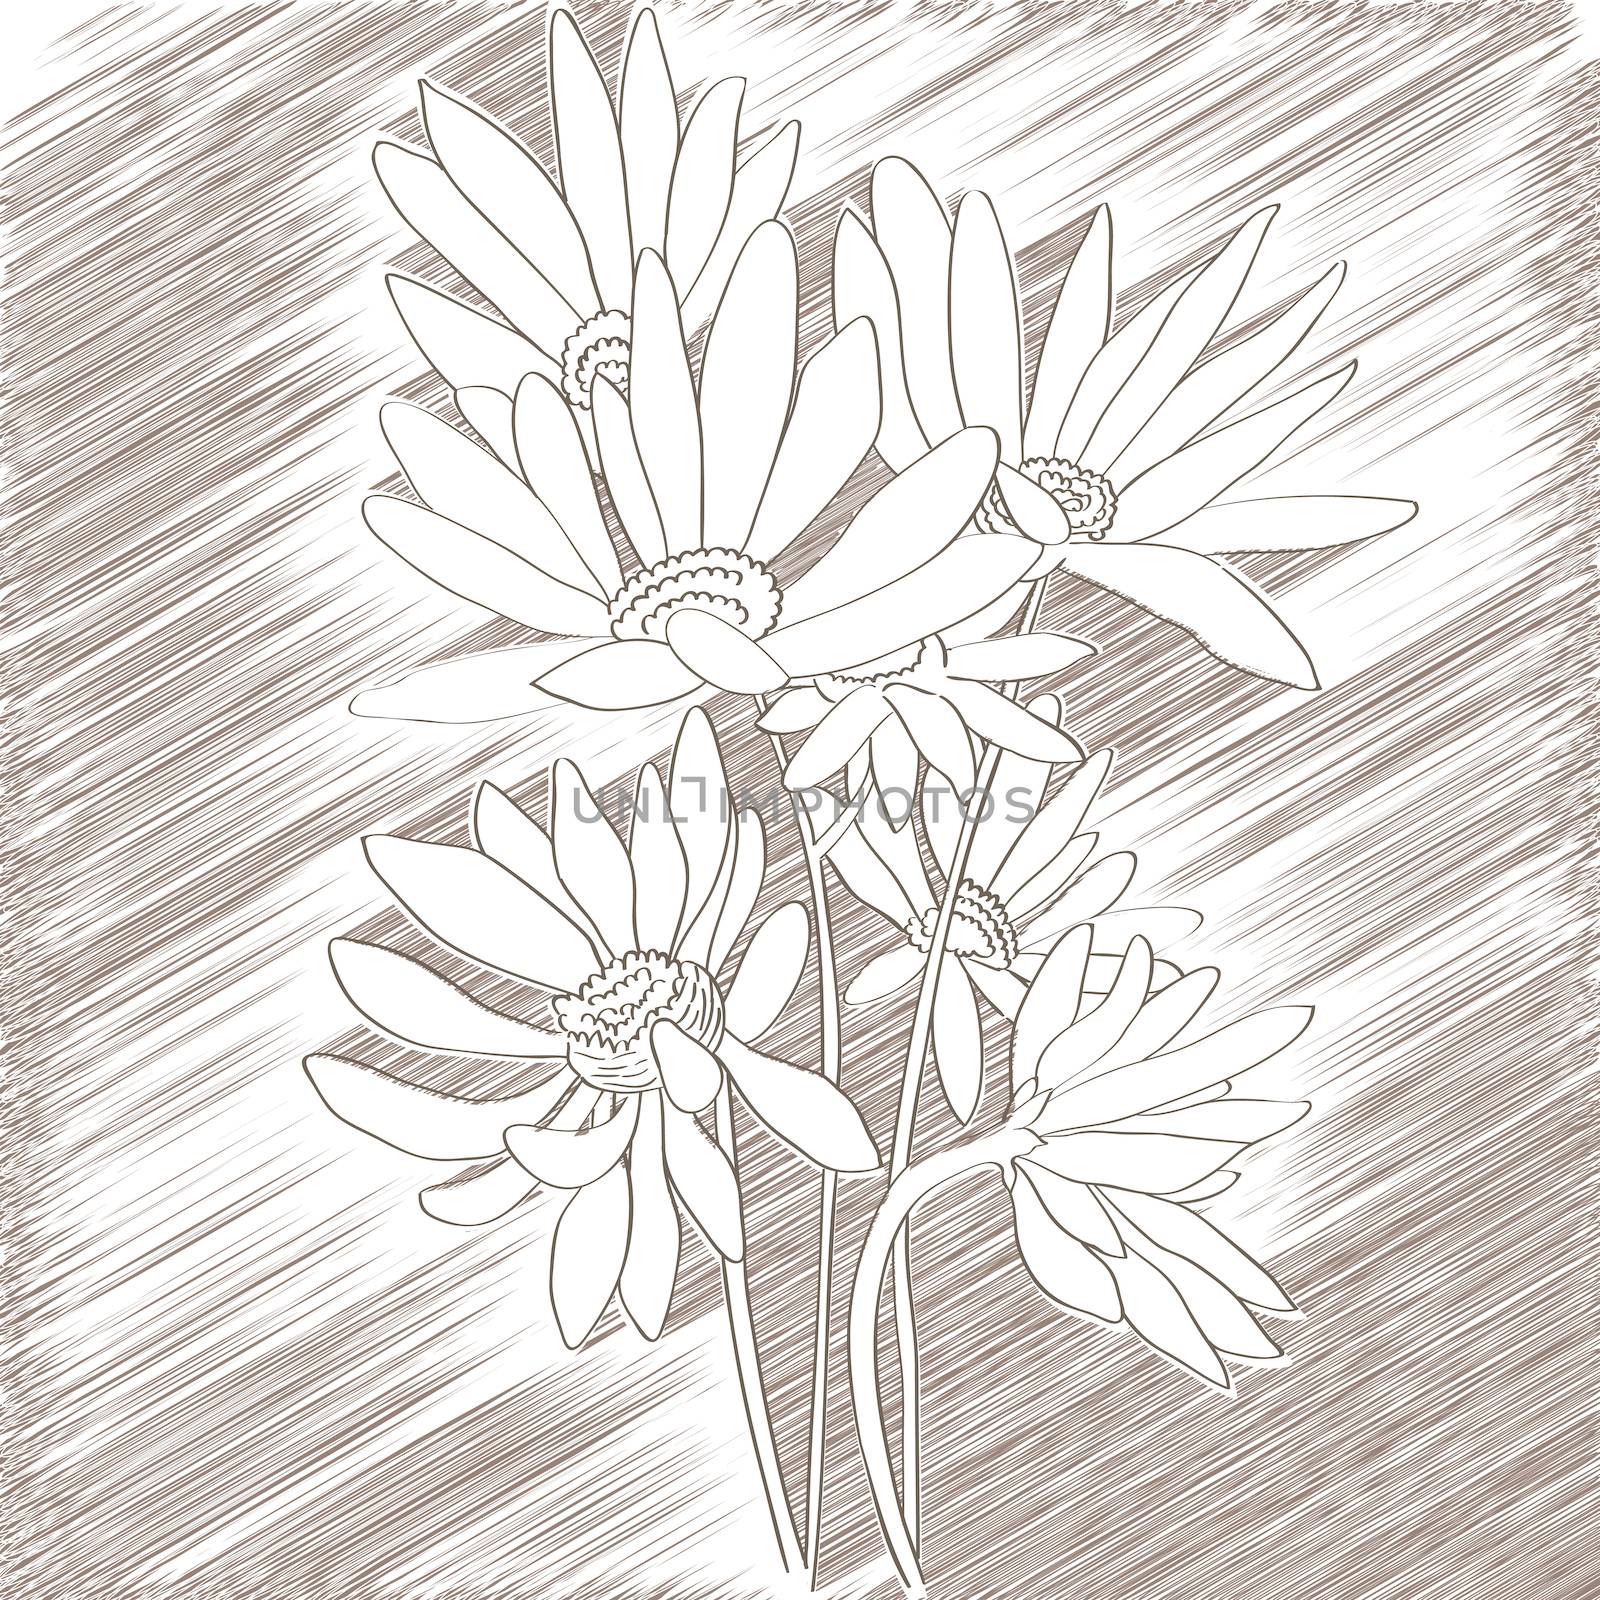 daisies sketch by catacos